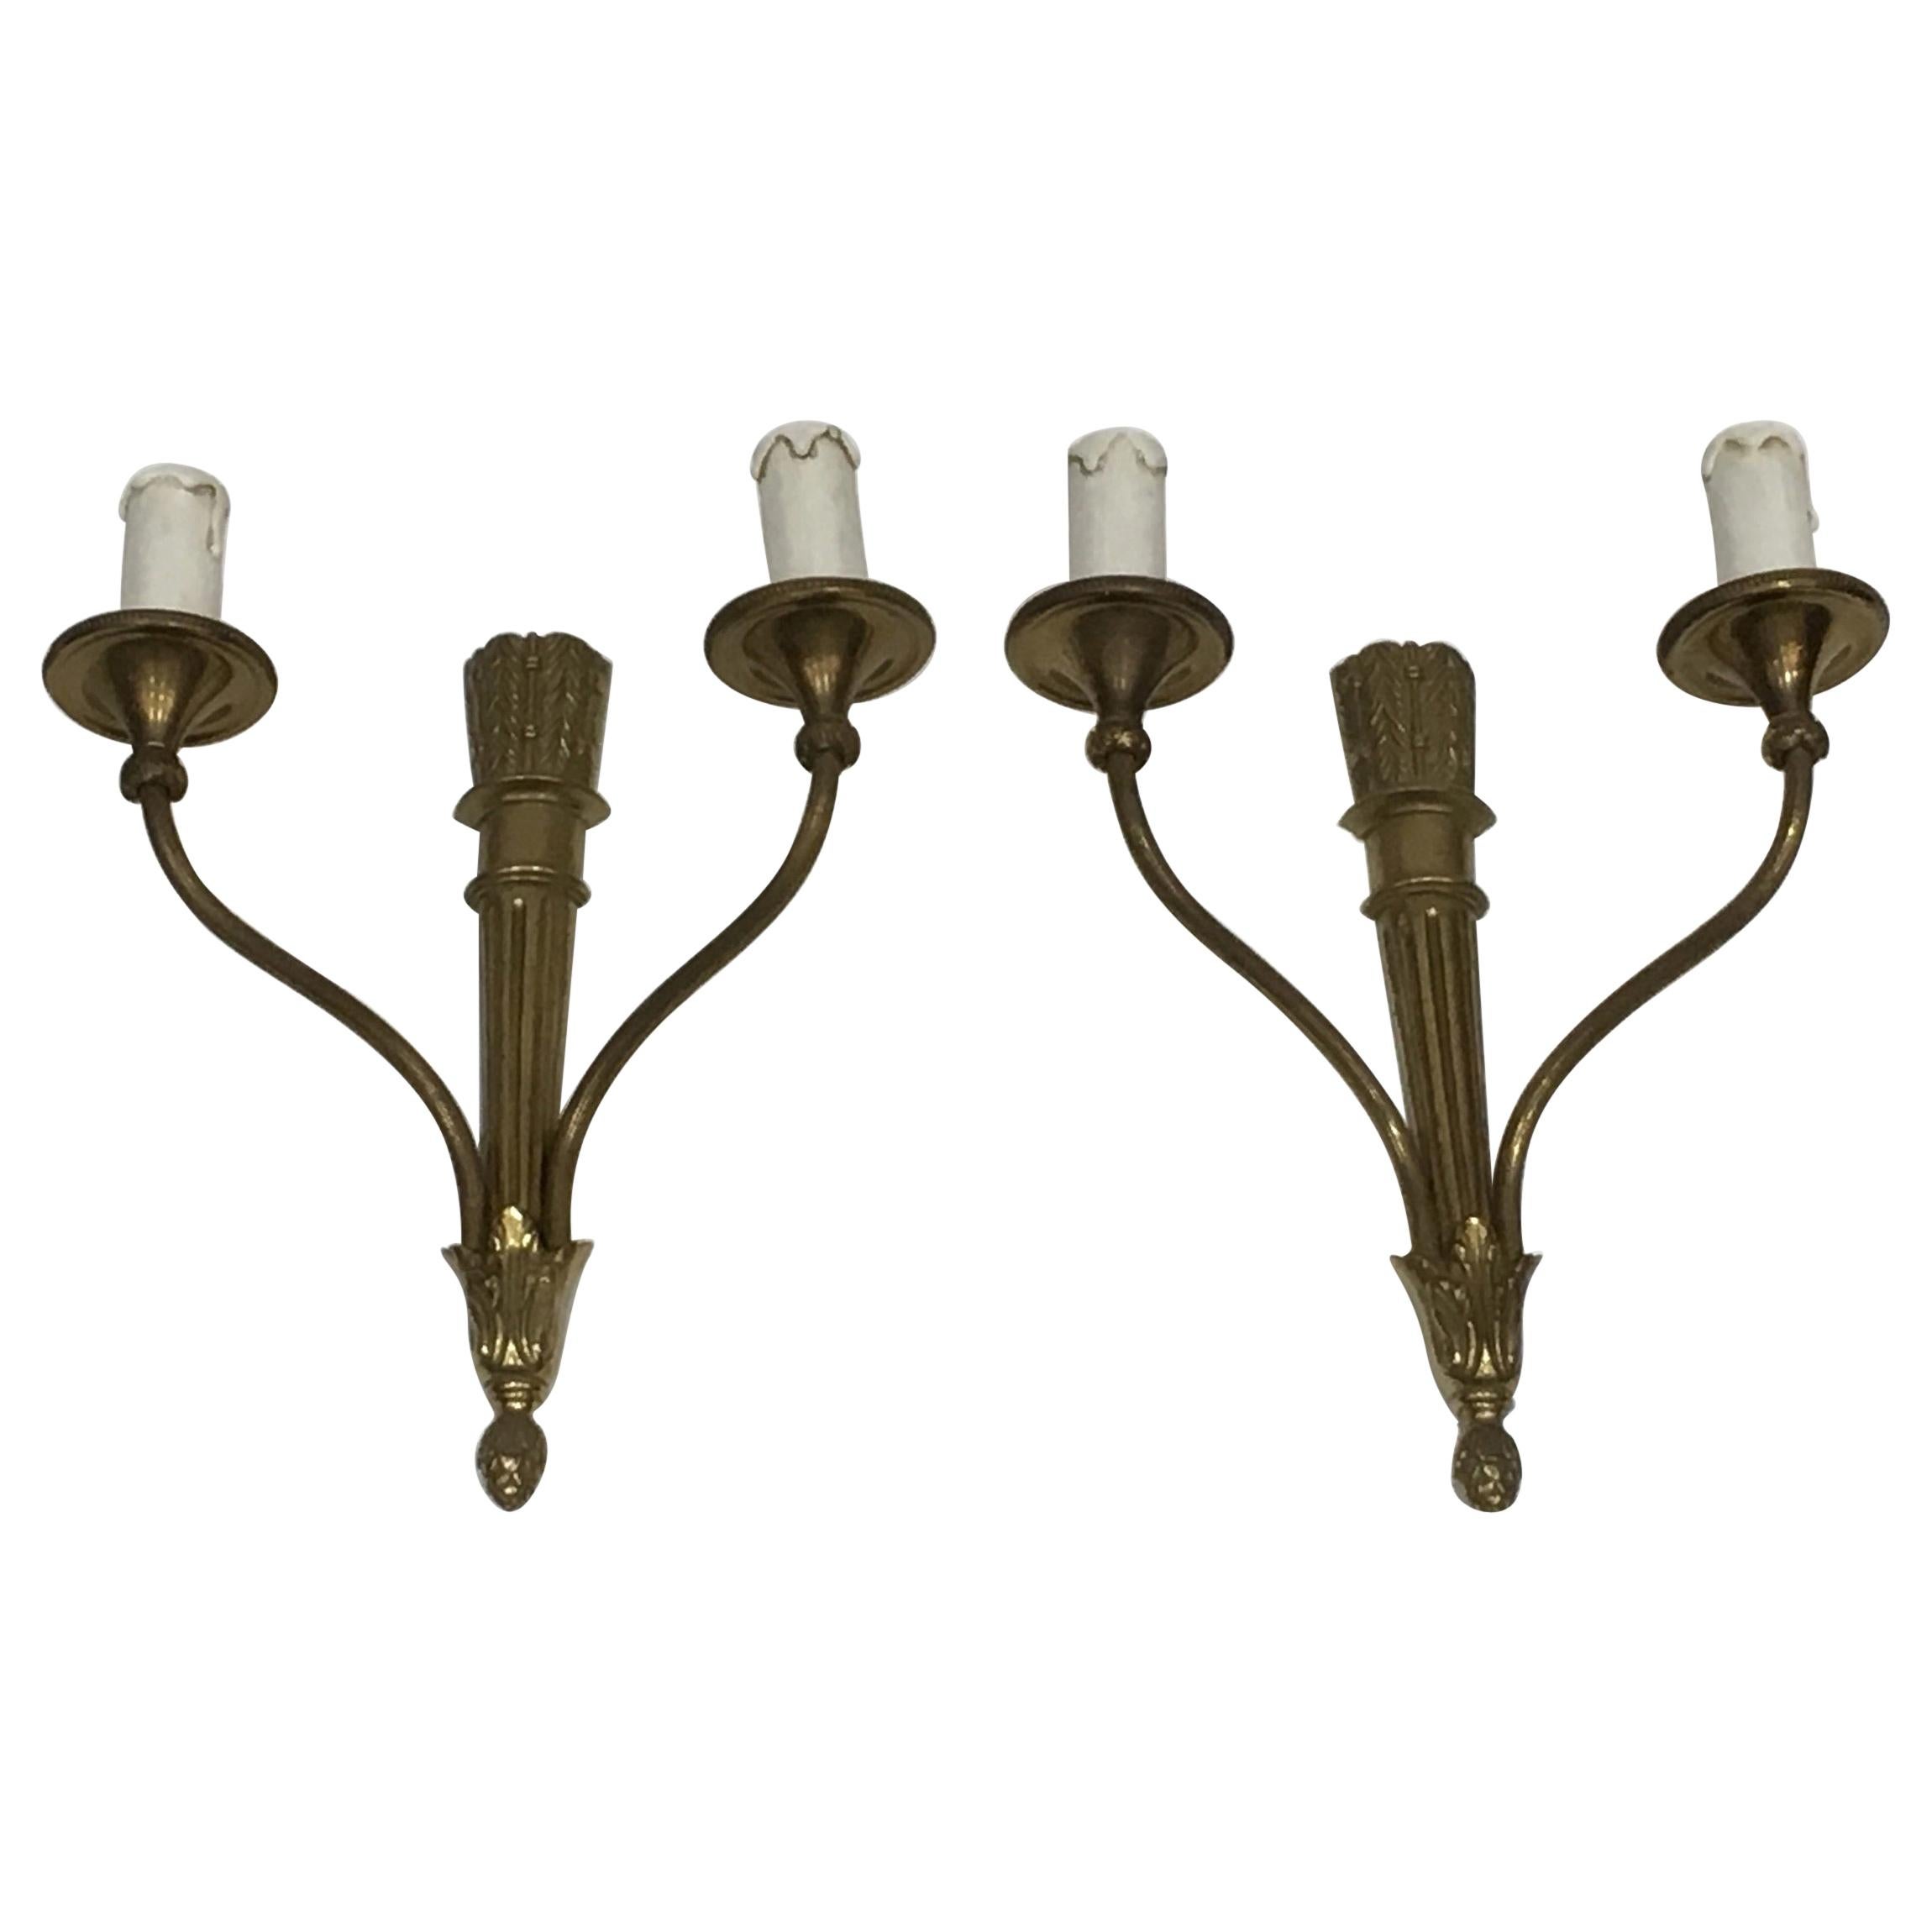 Louis XVI Style Pair of Bronze Wall Sconces with Quiver, French Work